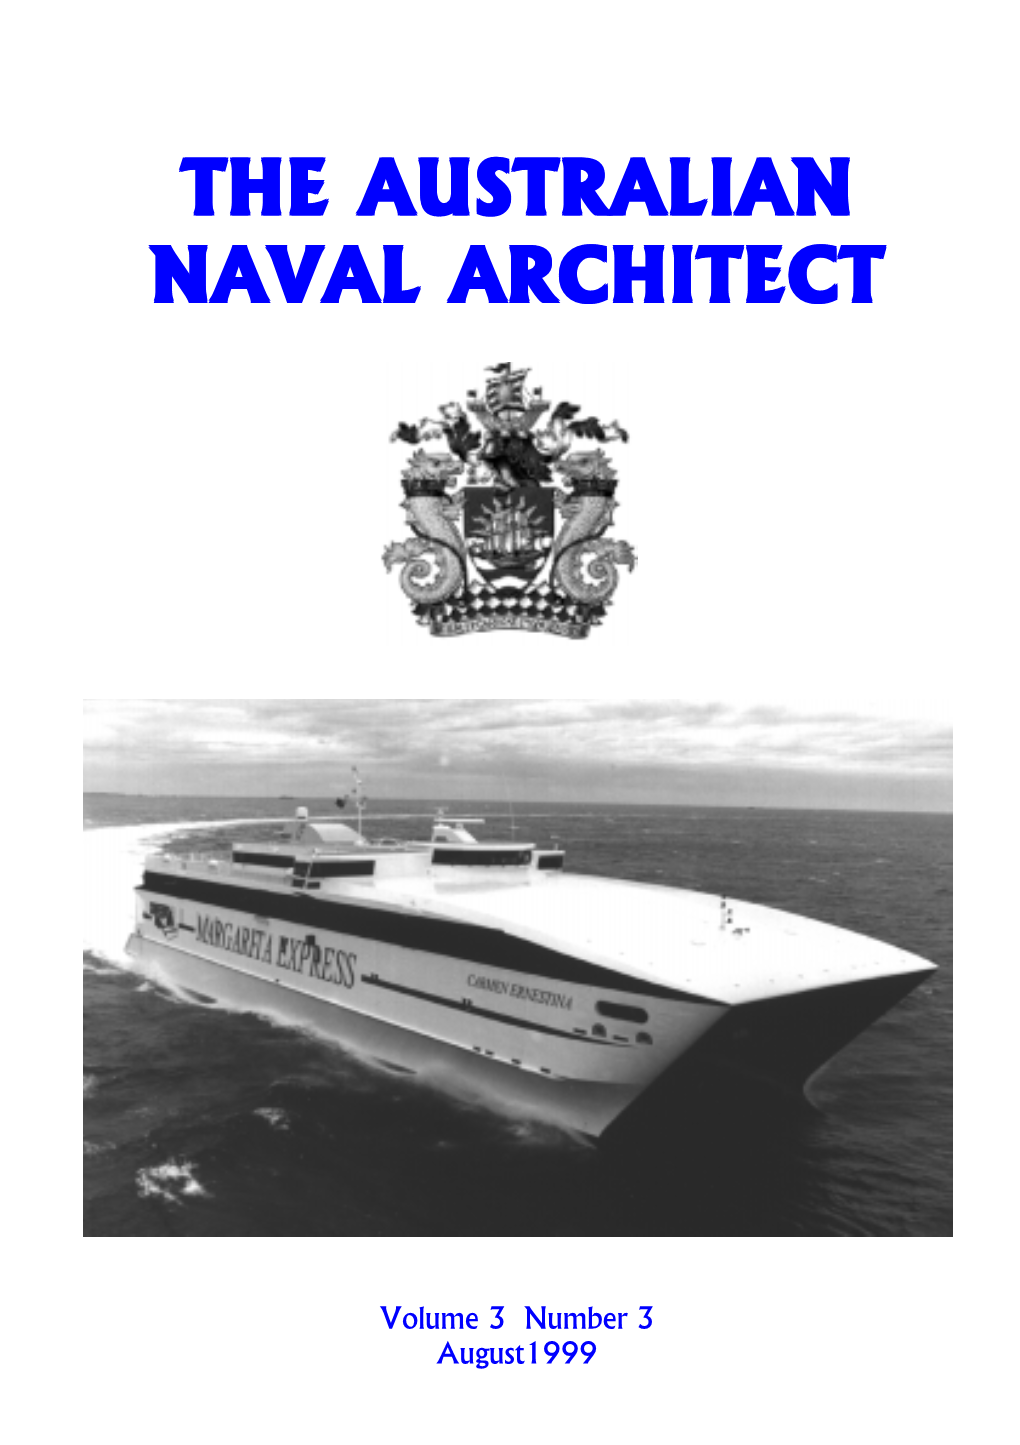 August1999 Need a Fast Ferry Design? Call Us! Phone +61 2 9488 9877 Fax +61 2 9488 8144 Email: Fastcats@Amd.Com.Au the AUSTRALIAN NAVAL ARCHITECT